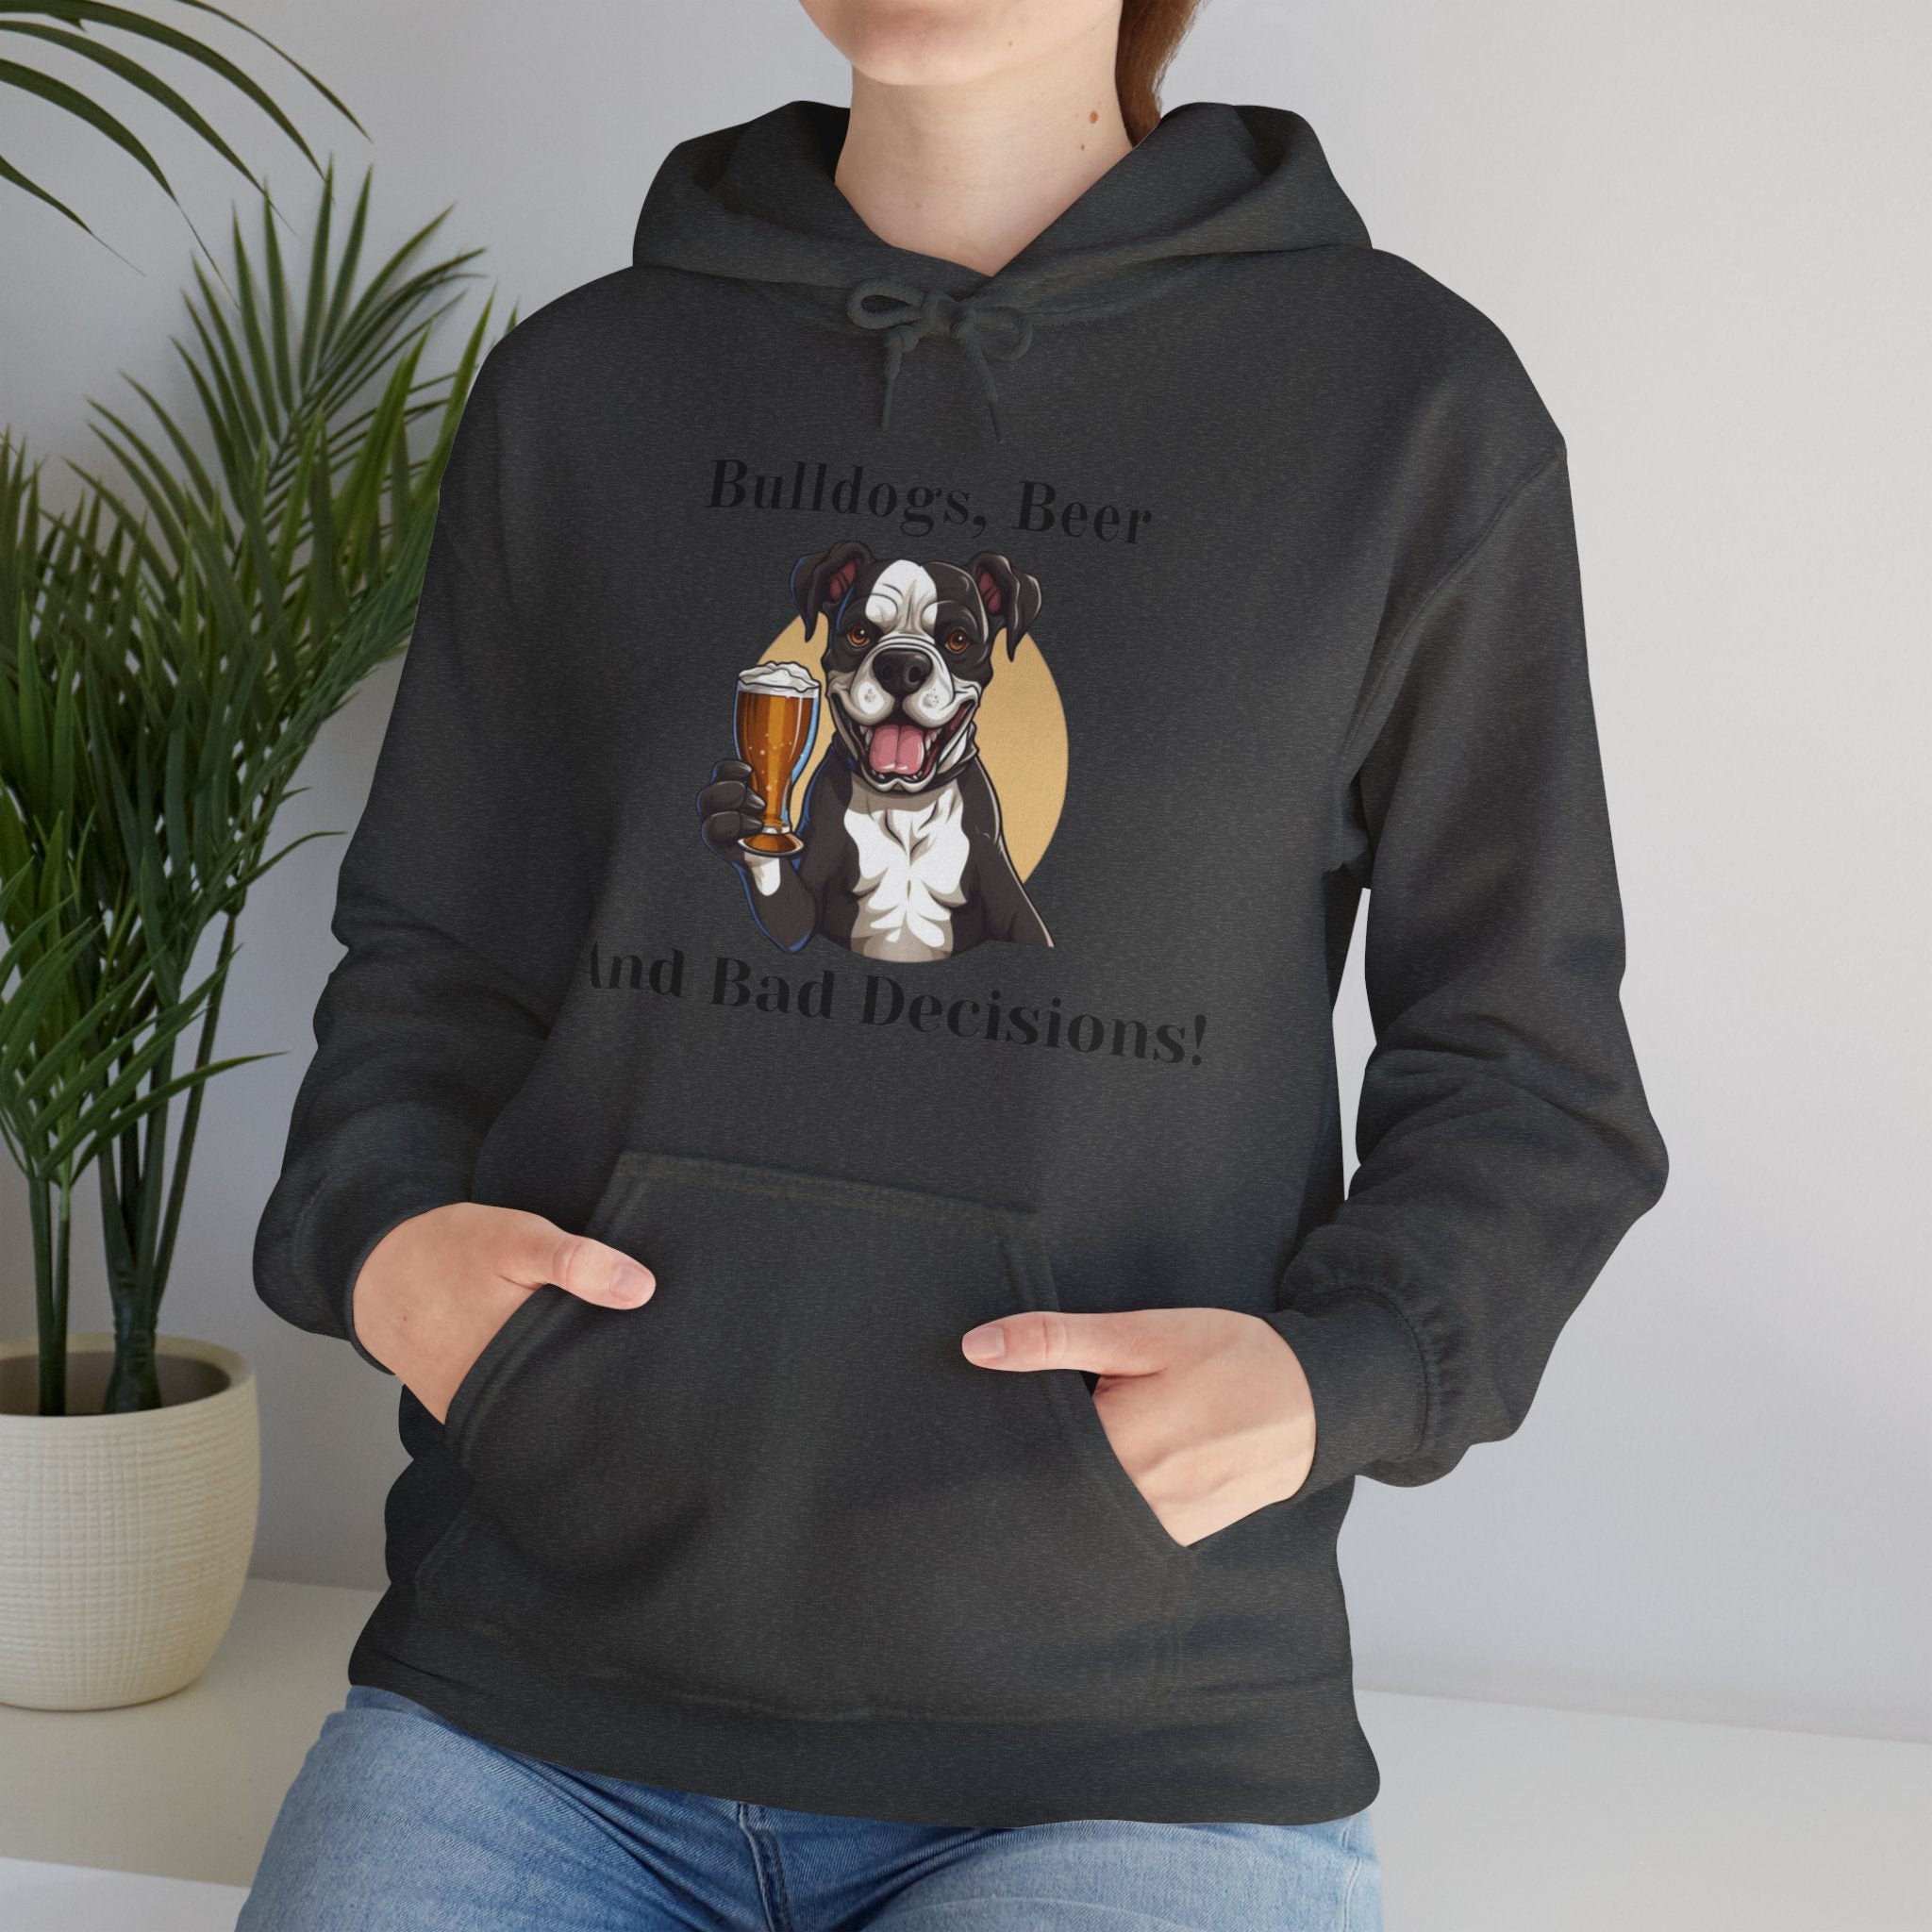 Bulldogs, Beer, and Bad Decisions" Hoodie - Your Go-To Gear for Mischievous Times! (American/Black)